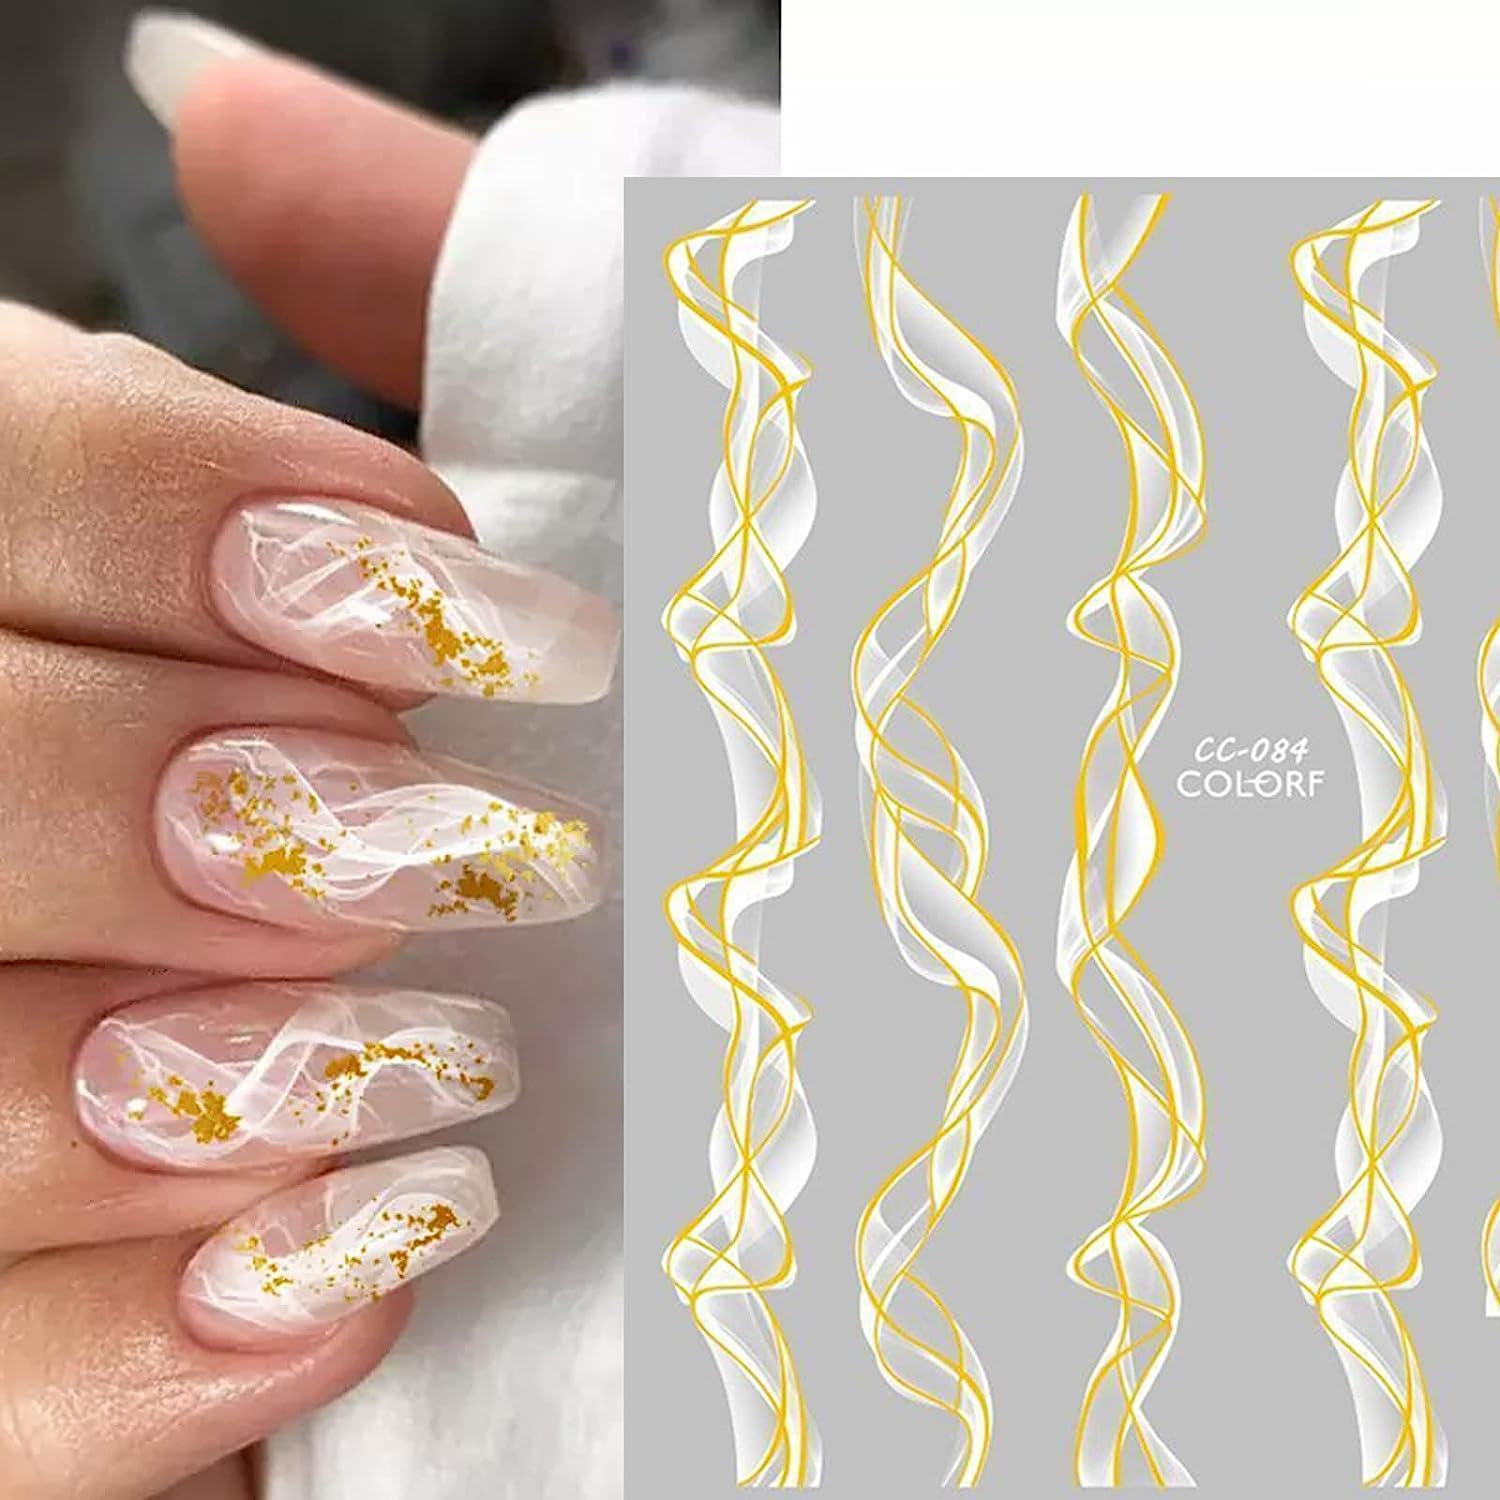 The Most Refined Marble Nails to Try - The Mood Guide